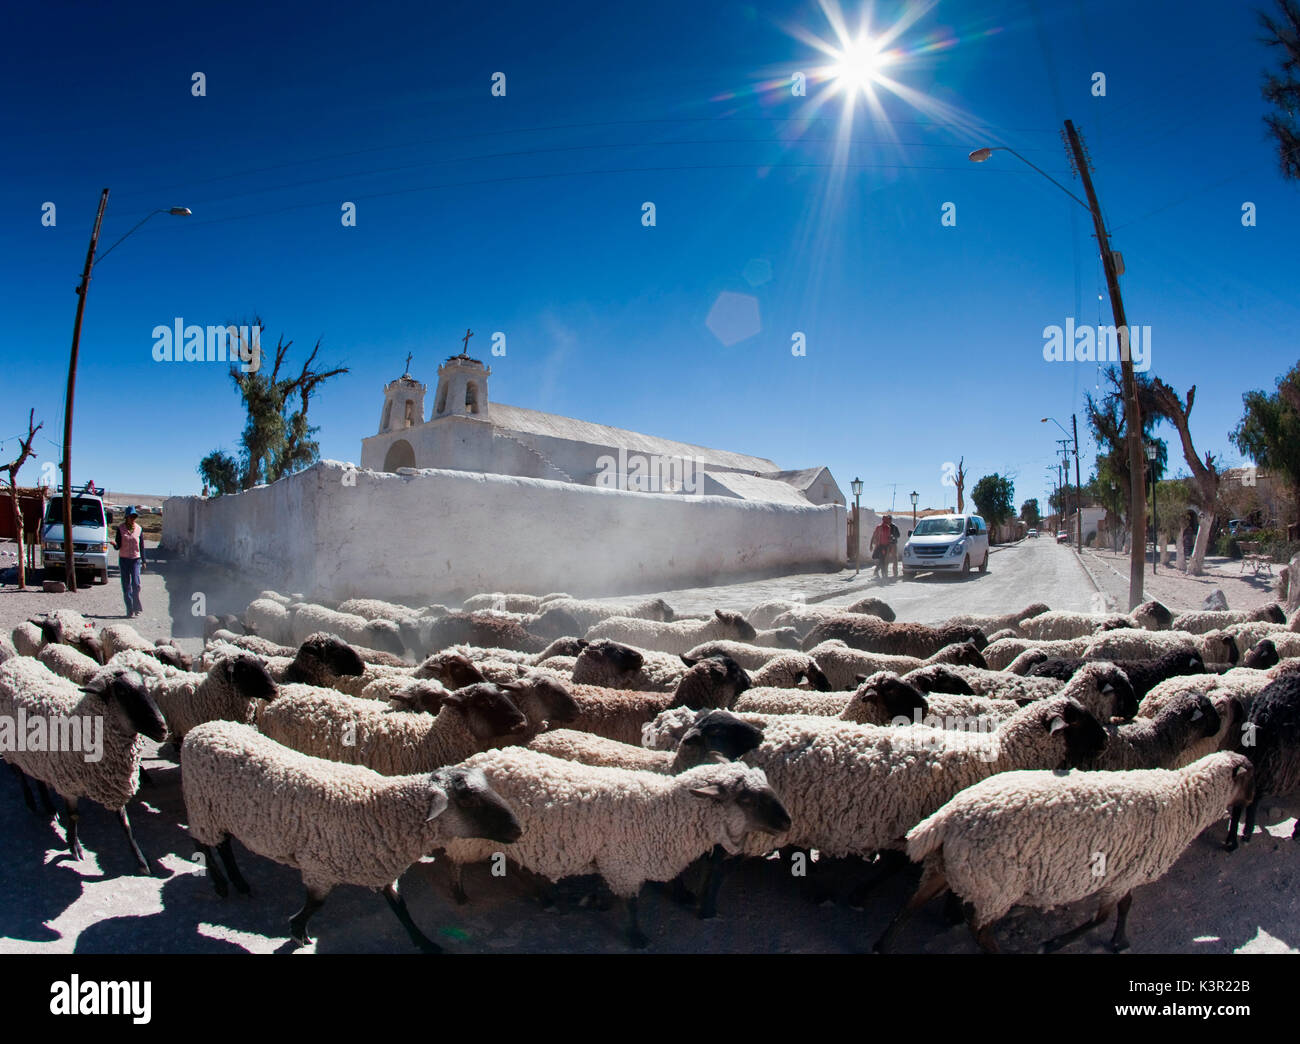 A flock of sheep crossing the main road of Chiu Chiu a town in Chile which was one of the stops on the Inca trail and is still a rest stop for travelers in the desert. South America Stock Photo